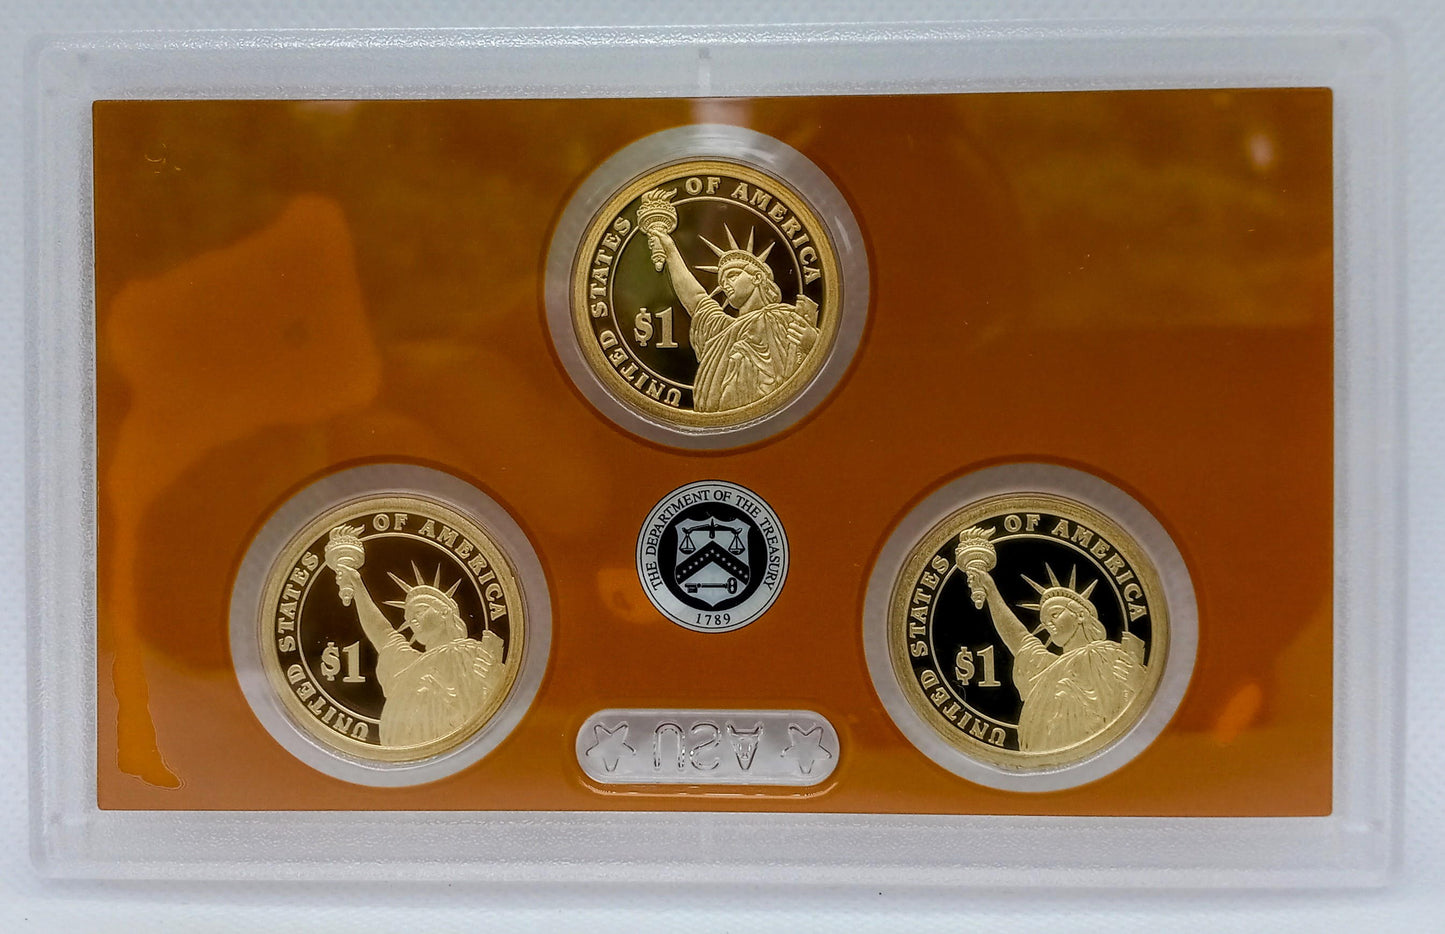 2016 United States Mint PRESIDENTIAL DOLLAR COIN PROOF SET With OGP & COA!